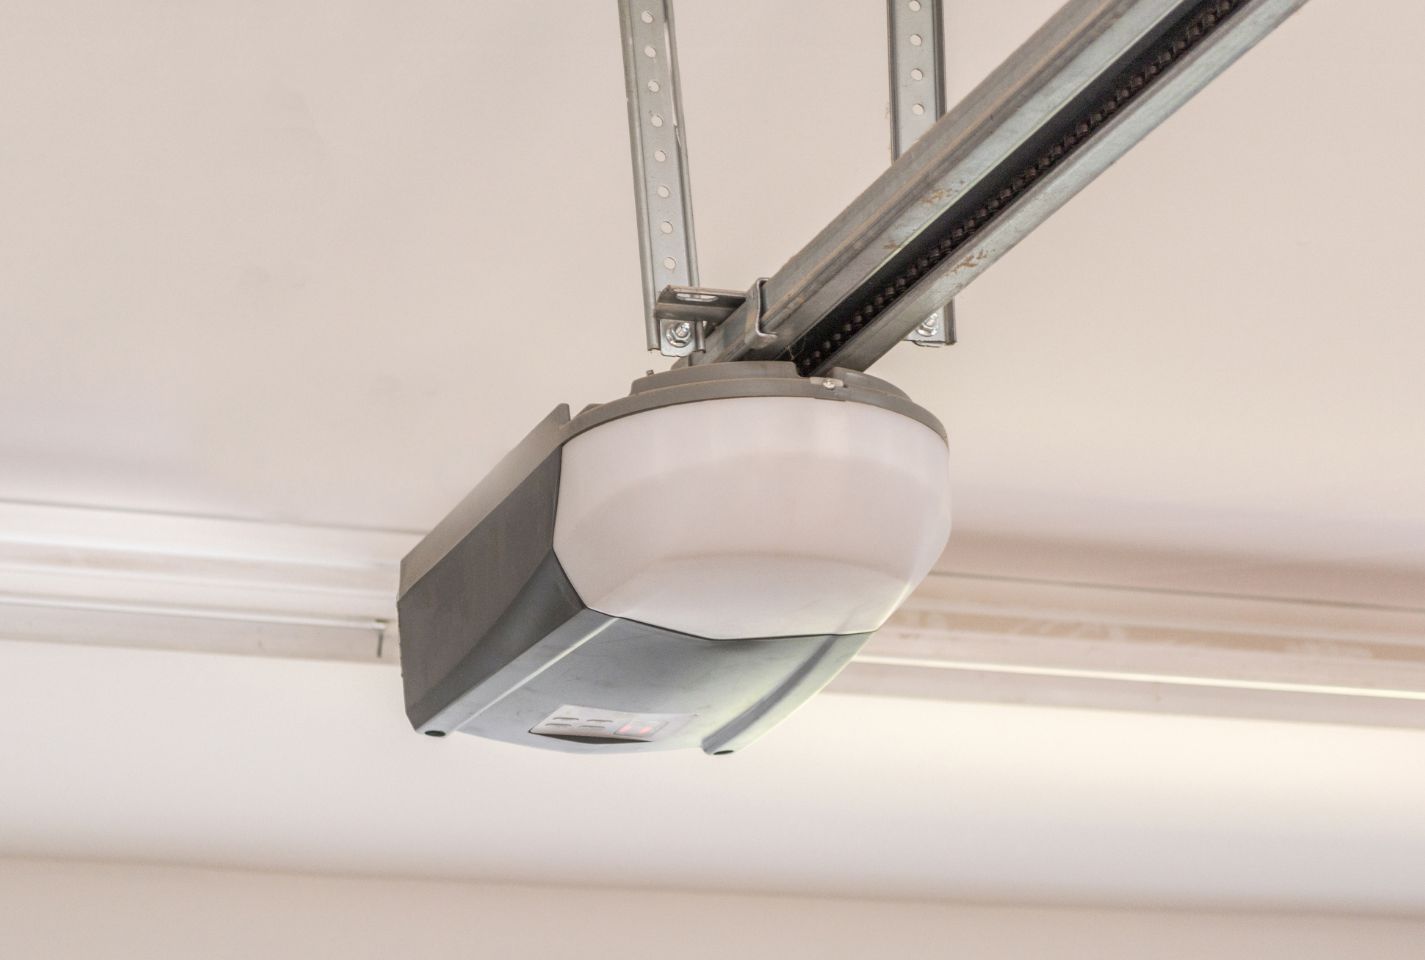 A close up of a garage door opener hanging from the ceiling.